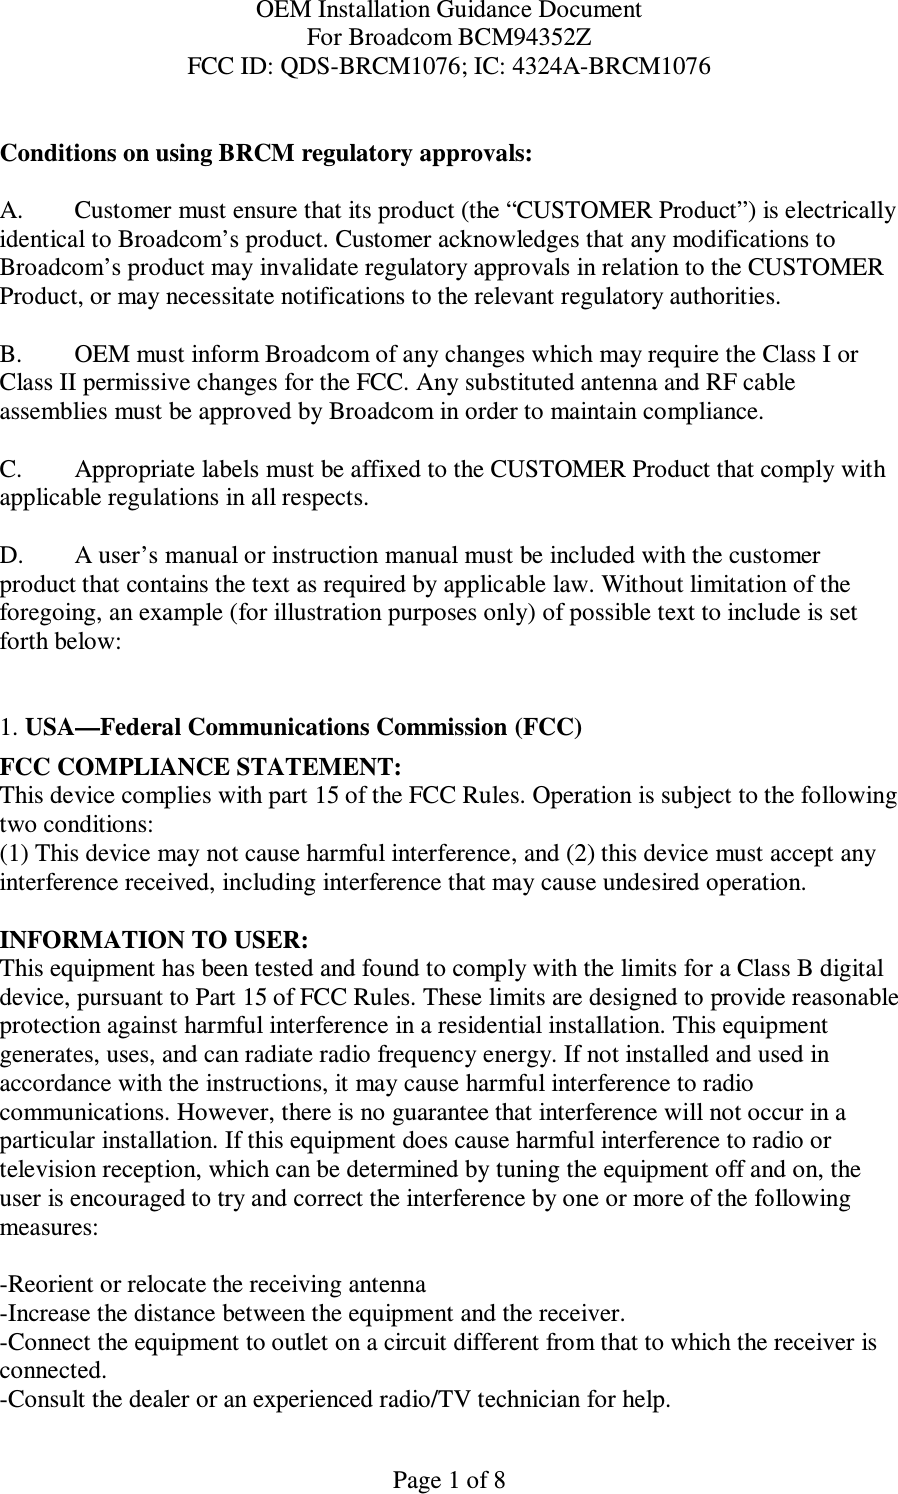 OEM Installation Guidance Document For Broadcom BCM94352Z FCC ID: QDS-BRCM1076; IC: 4324A-BRCM1076  Page 1 of 8  Conditions on using BRCM regulatory approvals:   A.  Customer must ensure that its product (the “CUSTOMER Product”) is electrically identical to Broadcom’s product. Customer acknowledges that any modifications to Broadcom’s product may invalidate regulatory approvals in relation to the CUSTOMER Product, or may necessitate notifications to the relevant regulatory authorities.   B.   OEM must inform Broadcom of any changes which may require the Class I or Class II permissive changes for the FCC. Any substituted antenna and RF cable assemblies must be approved by Broadcom in order to maintain compliance.  C.  Appropriate labels must be affixed to the CUSTOMER Product that comply with  applicable regulations in all respects.    D.   A user’s manual or instruction manual must be included with the customer product that contains the text as required by applicable law. Without limitation of the foregoing, an example (for illustration purposes only) of possible text to include is set forth below:    1. USA—Federal Communications Commission (FCC) FCC COMPLIANCE STATEMENT: This device complies with part 15 of the FCC Rules. Operation is subject to the following two conditions: (1) This device may not cause harmful interference, and (2) this device must accept any interference received, including interference that may cause undesired operation.  INFORMATION TO USER: This equipment has been tested and found to comply with the limits for a Class B digital device, pursuant to Part 15 of FCC Rules. These limits are designed to provide reasonable protection against harmful interference in a residential installation. This equipment generates, uses, and can radiate radio frequency energy. If not installed and used in accordance with the instructions, it may cause harmful interference to radio communications. However, there is no guarantee that interference will not occur in a particular installation. If this equipment does cause harmful interference to radio or television reception, which can be determined by tuning the equipment off and on, the user is encouraged to try and correct the interference by one or more of the following measures:    -Reorient or relocate the receiving antenna -Increase the distance between the equipment and the receiver. -Connect the equipment to outlet on a circuit different from that to which the receiver is connected. -Consult the dealer or an experienced radio/TV technician for help. 